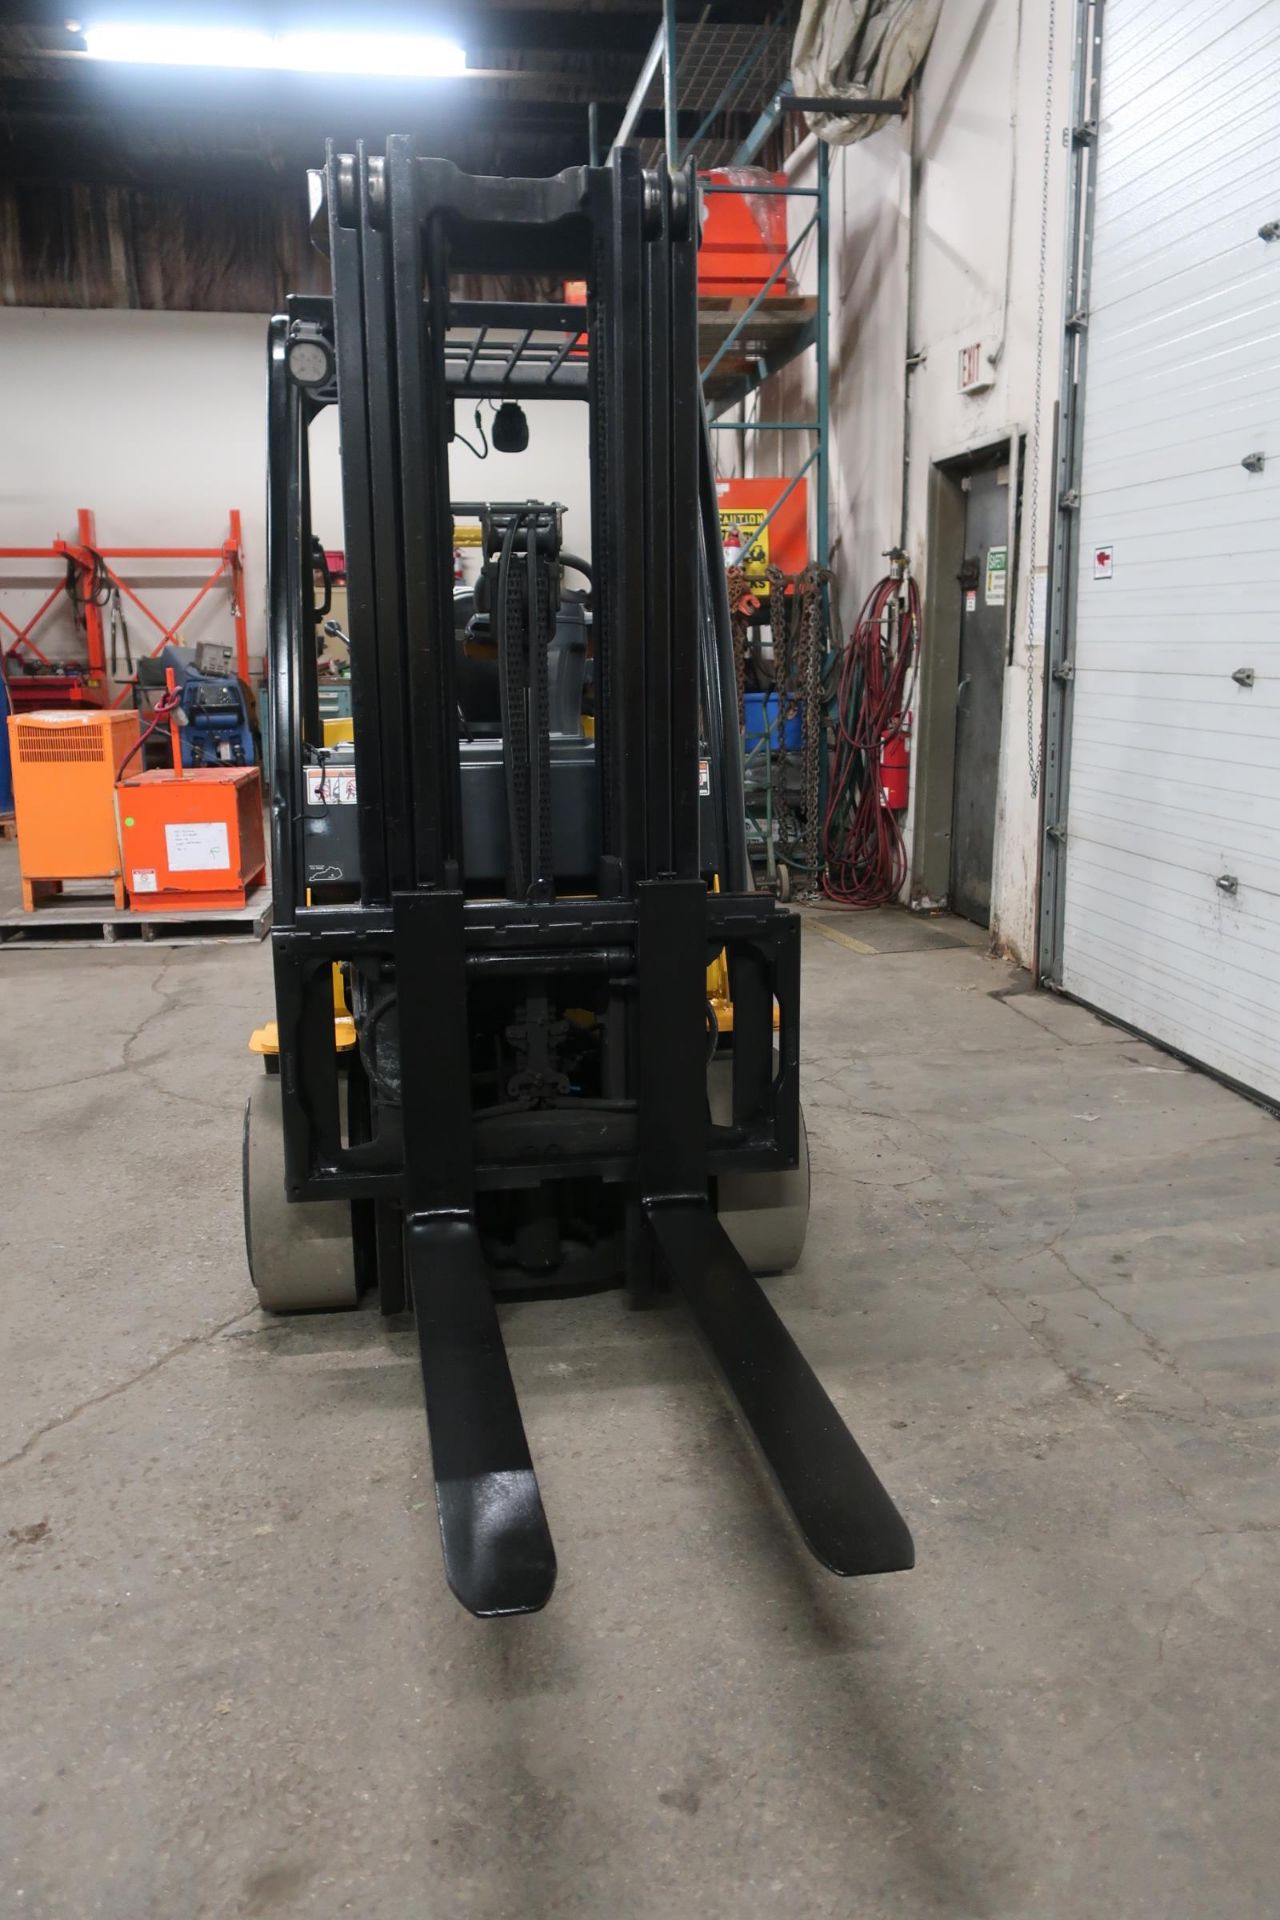 FREE CUSTOMS - 2014 Yale 7000lbs Capacity Forklift with 3-stage mast - LPG (propane) with sideshift - Image 2 of 2